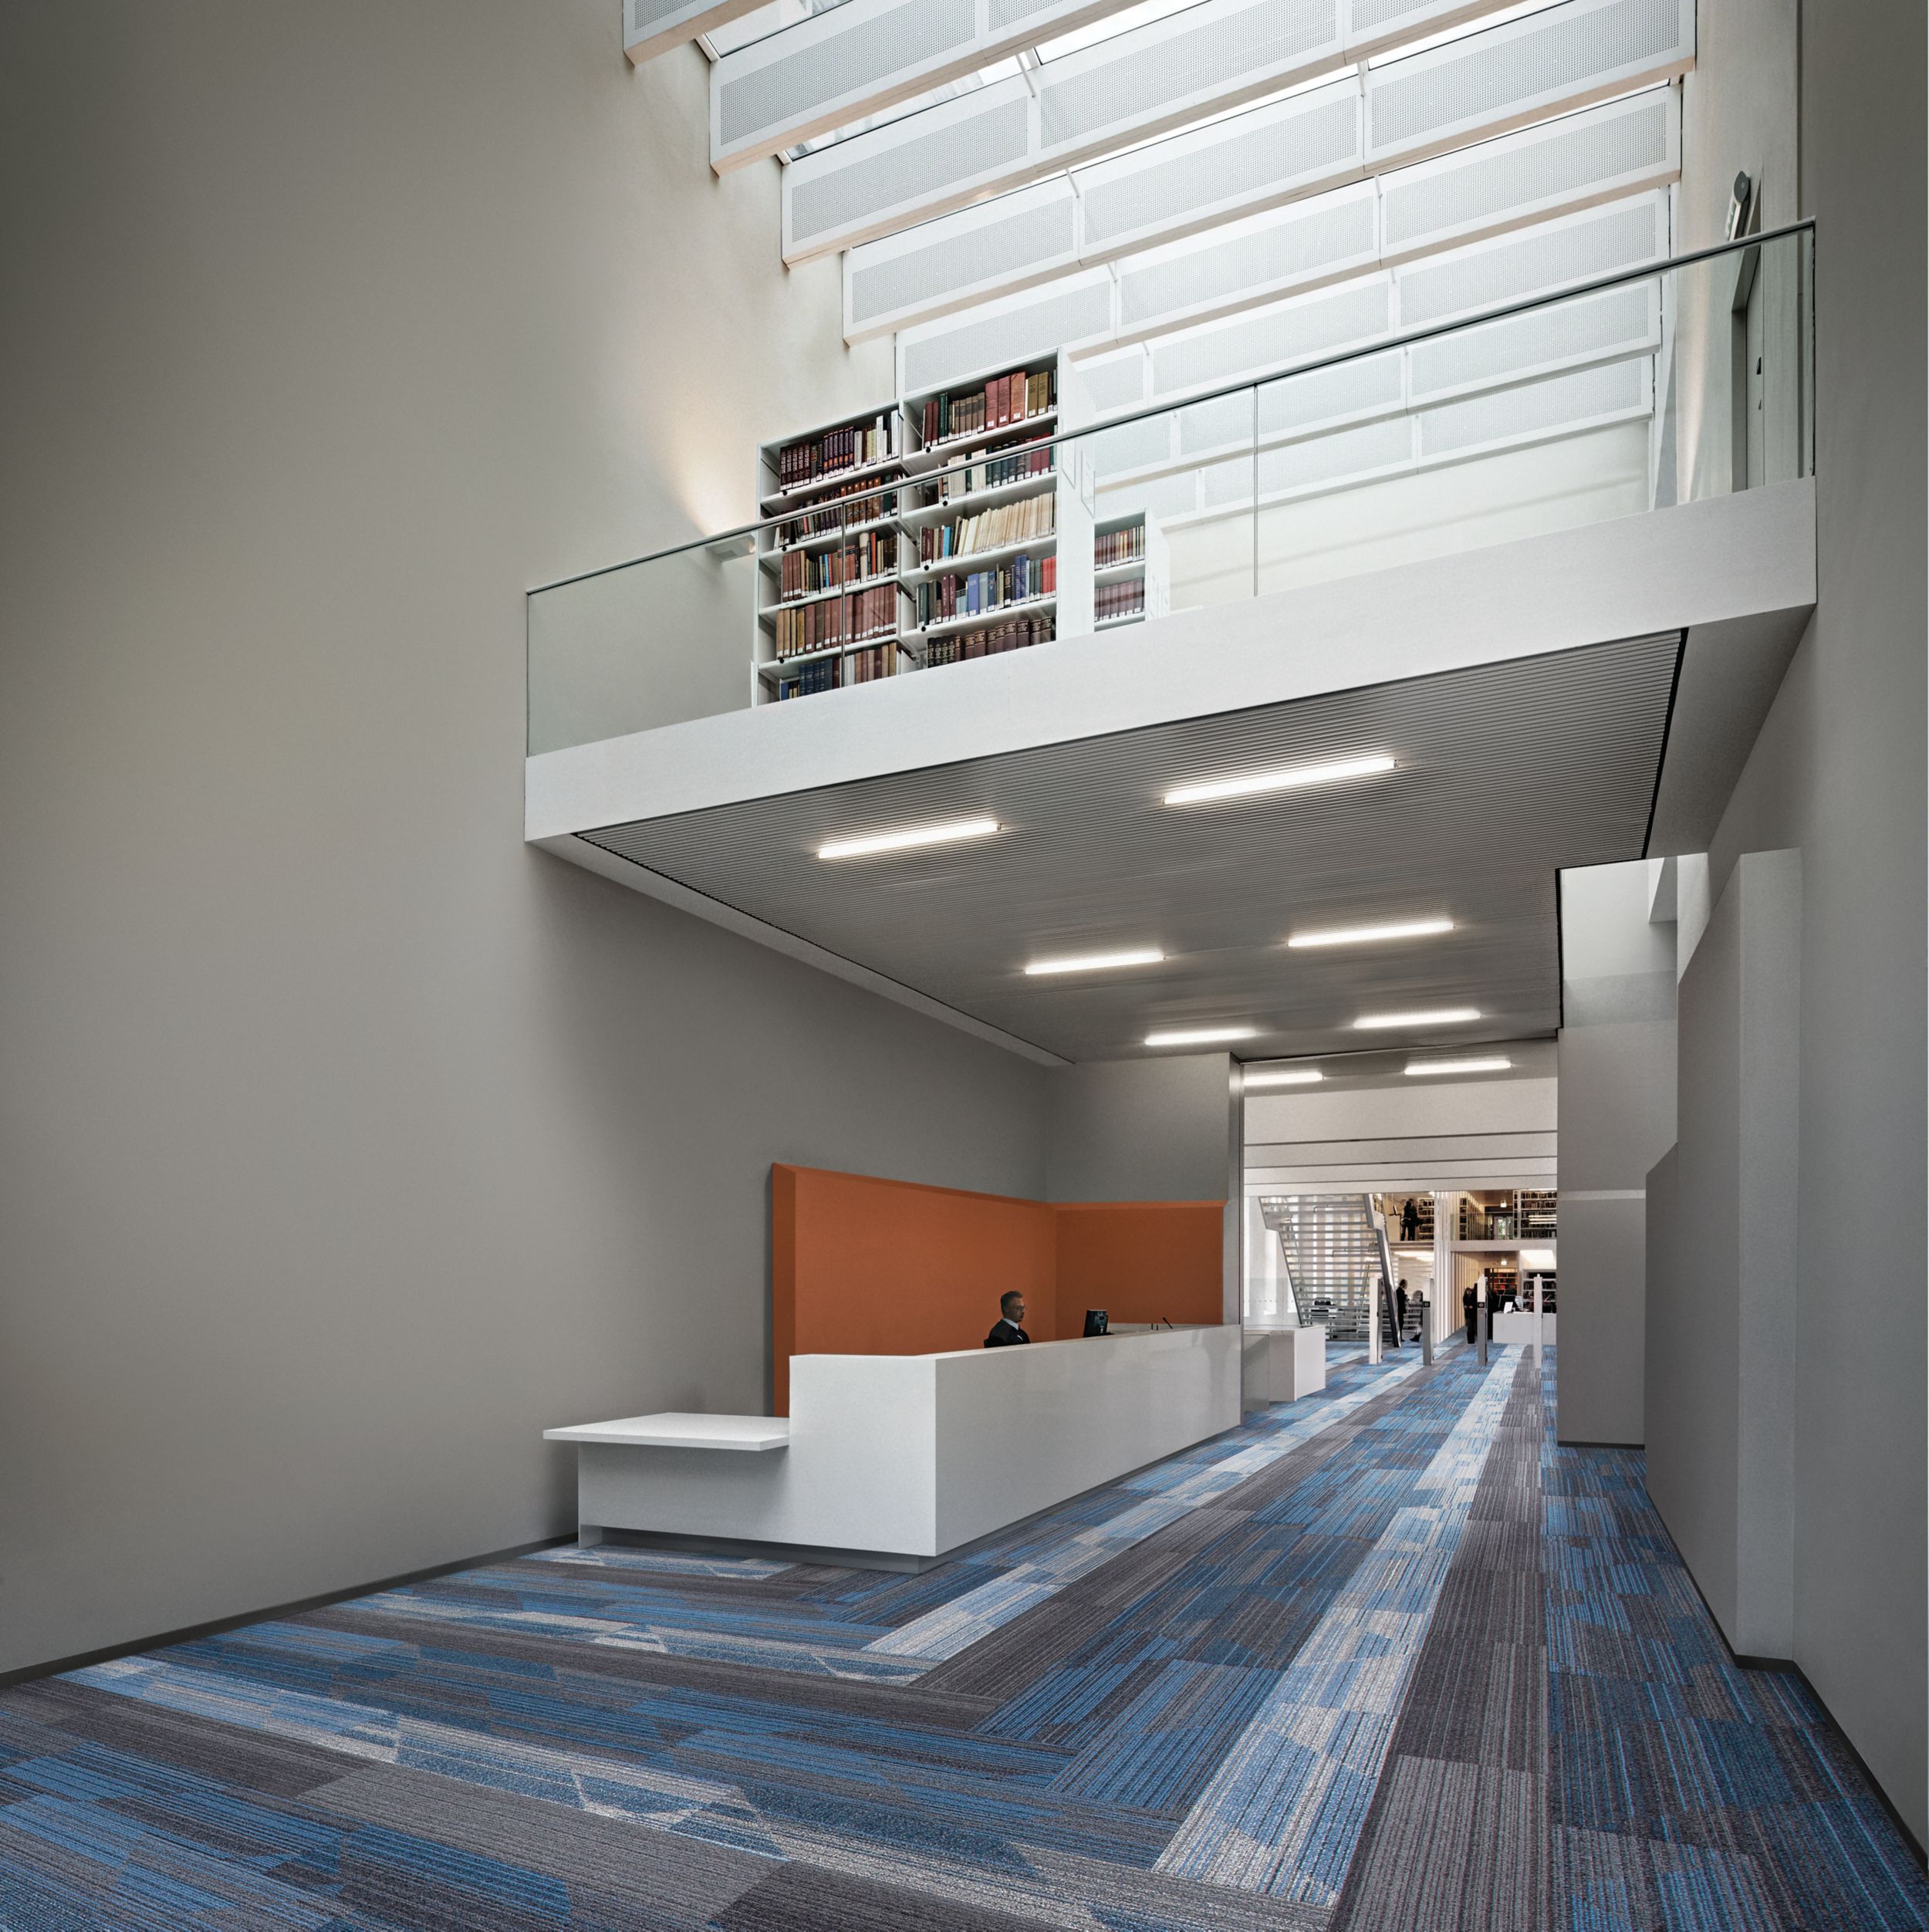 Interface Driftwood and Shiver Me Timbers plank carpet tile in recpetionist area of library imagen número 2